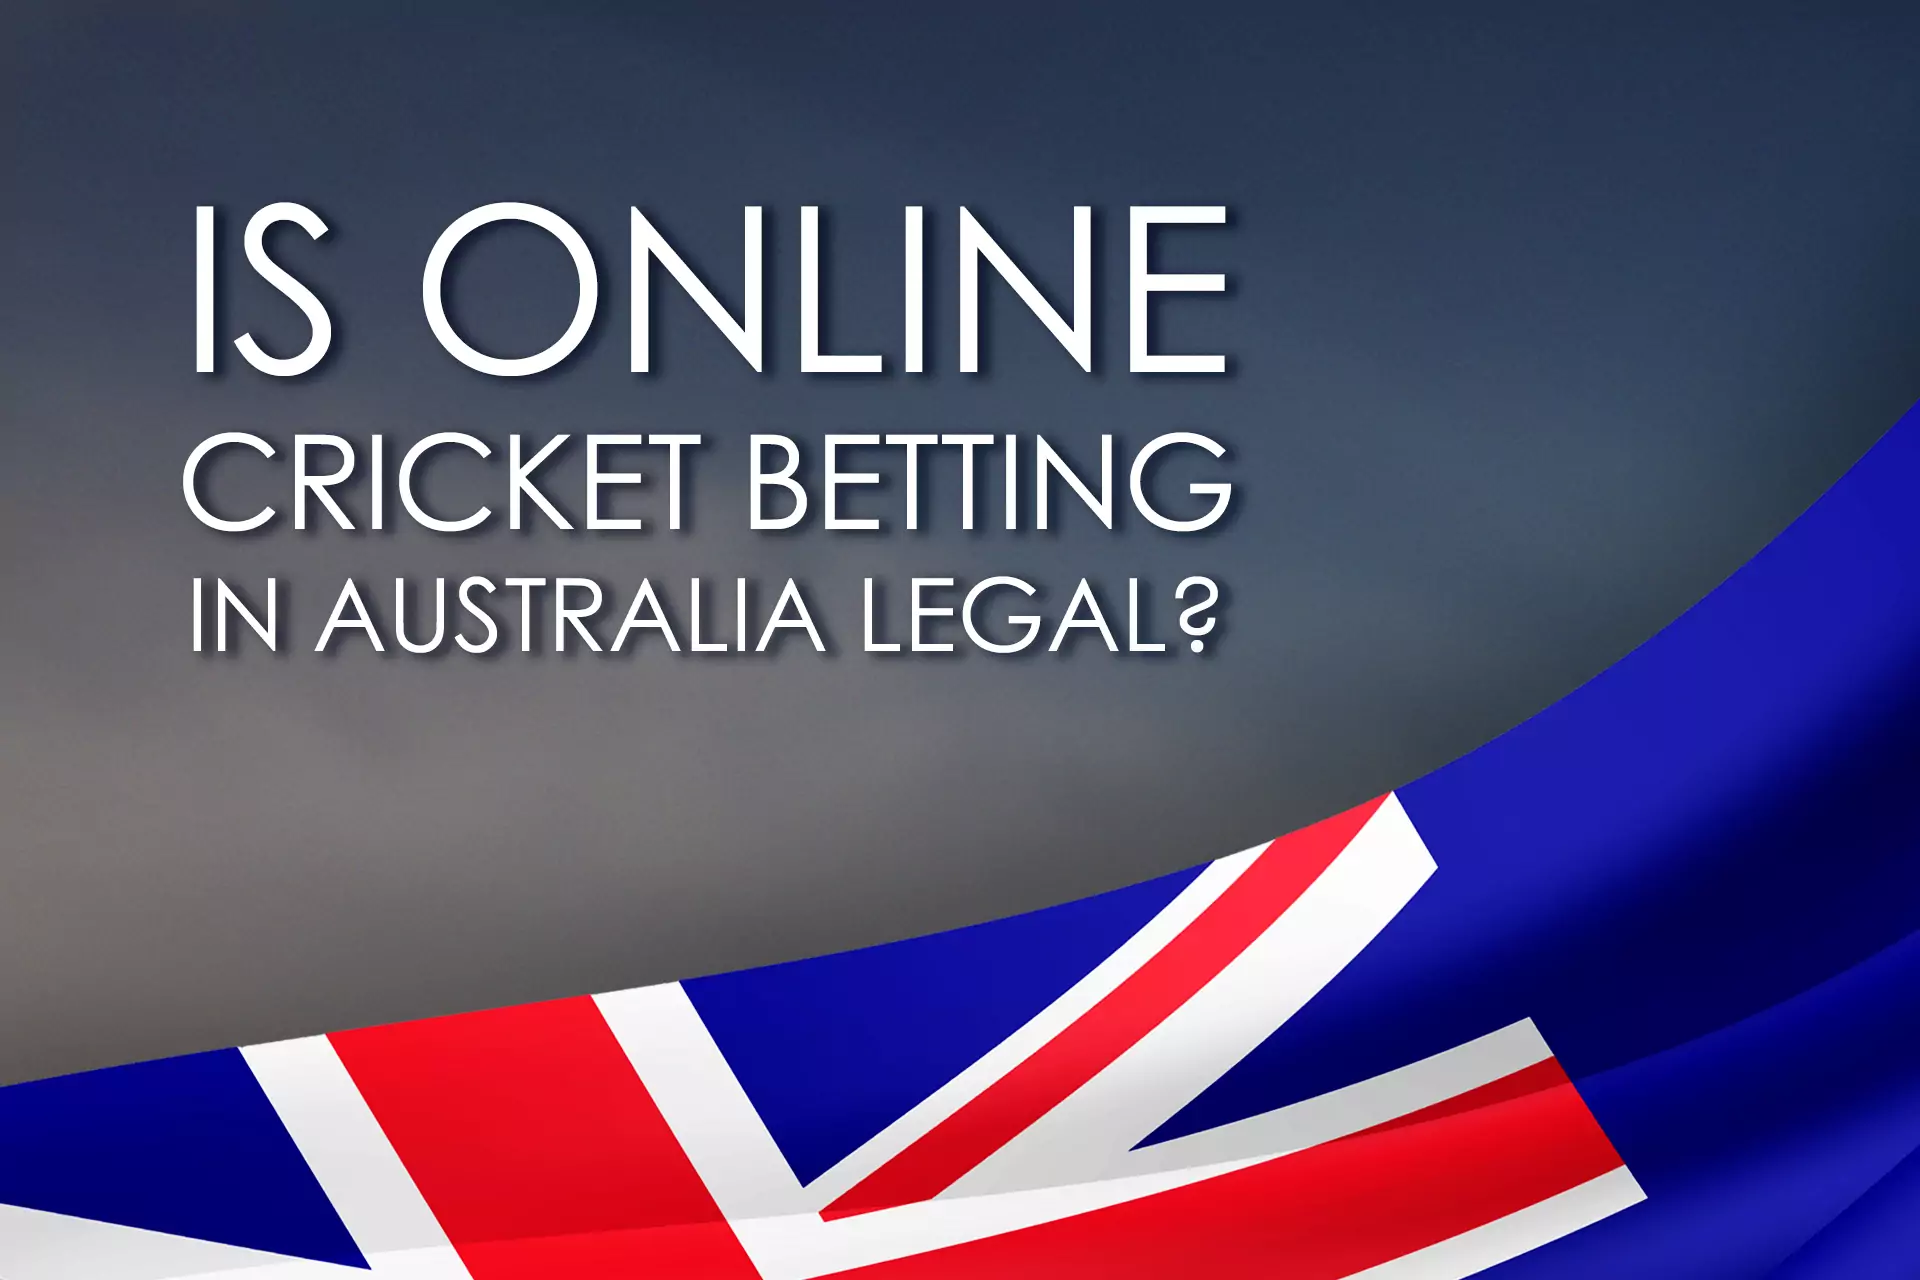 Cricket betting is totally legal in Australia at online bookmaker sites.